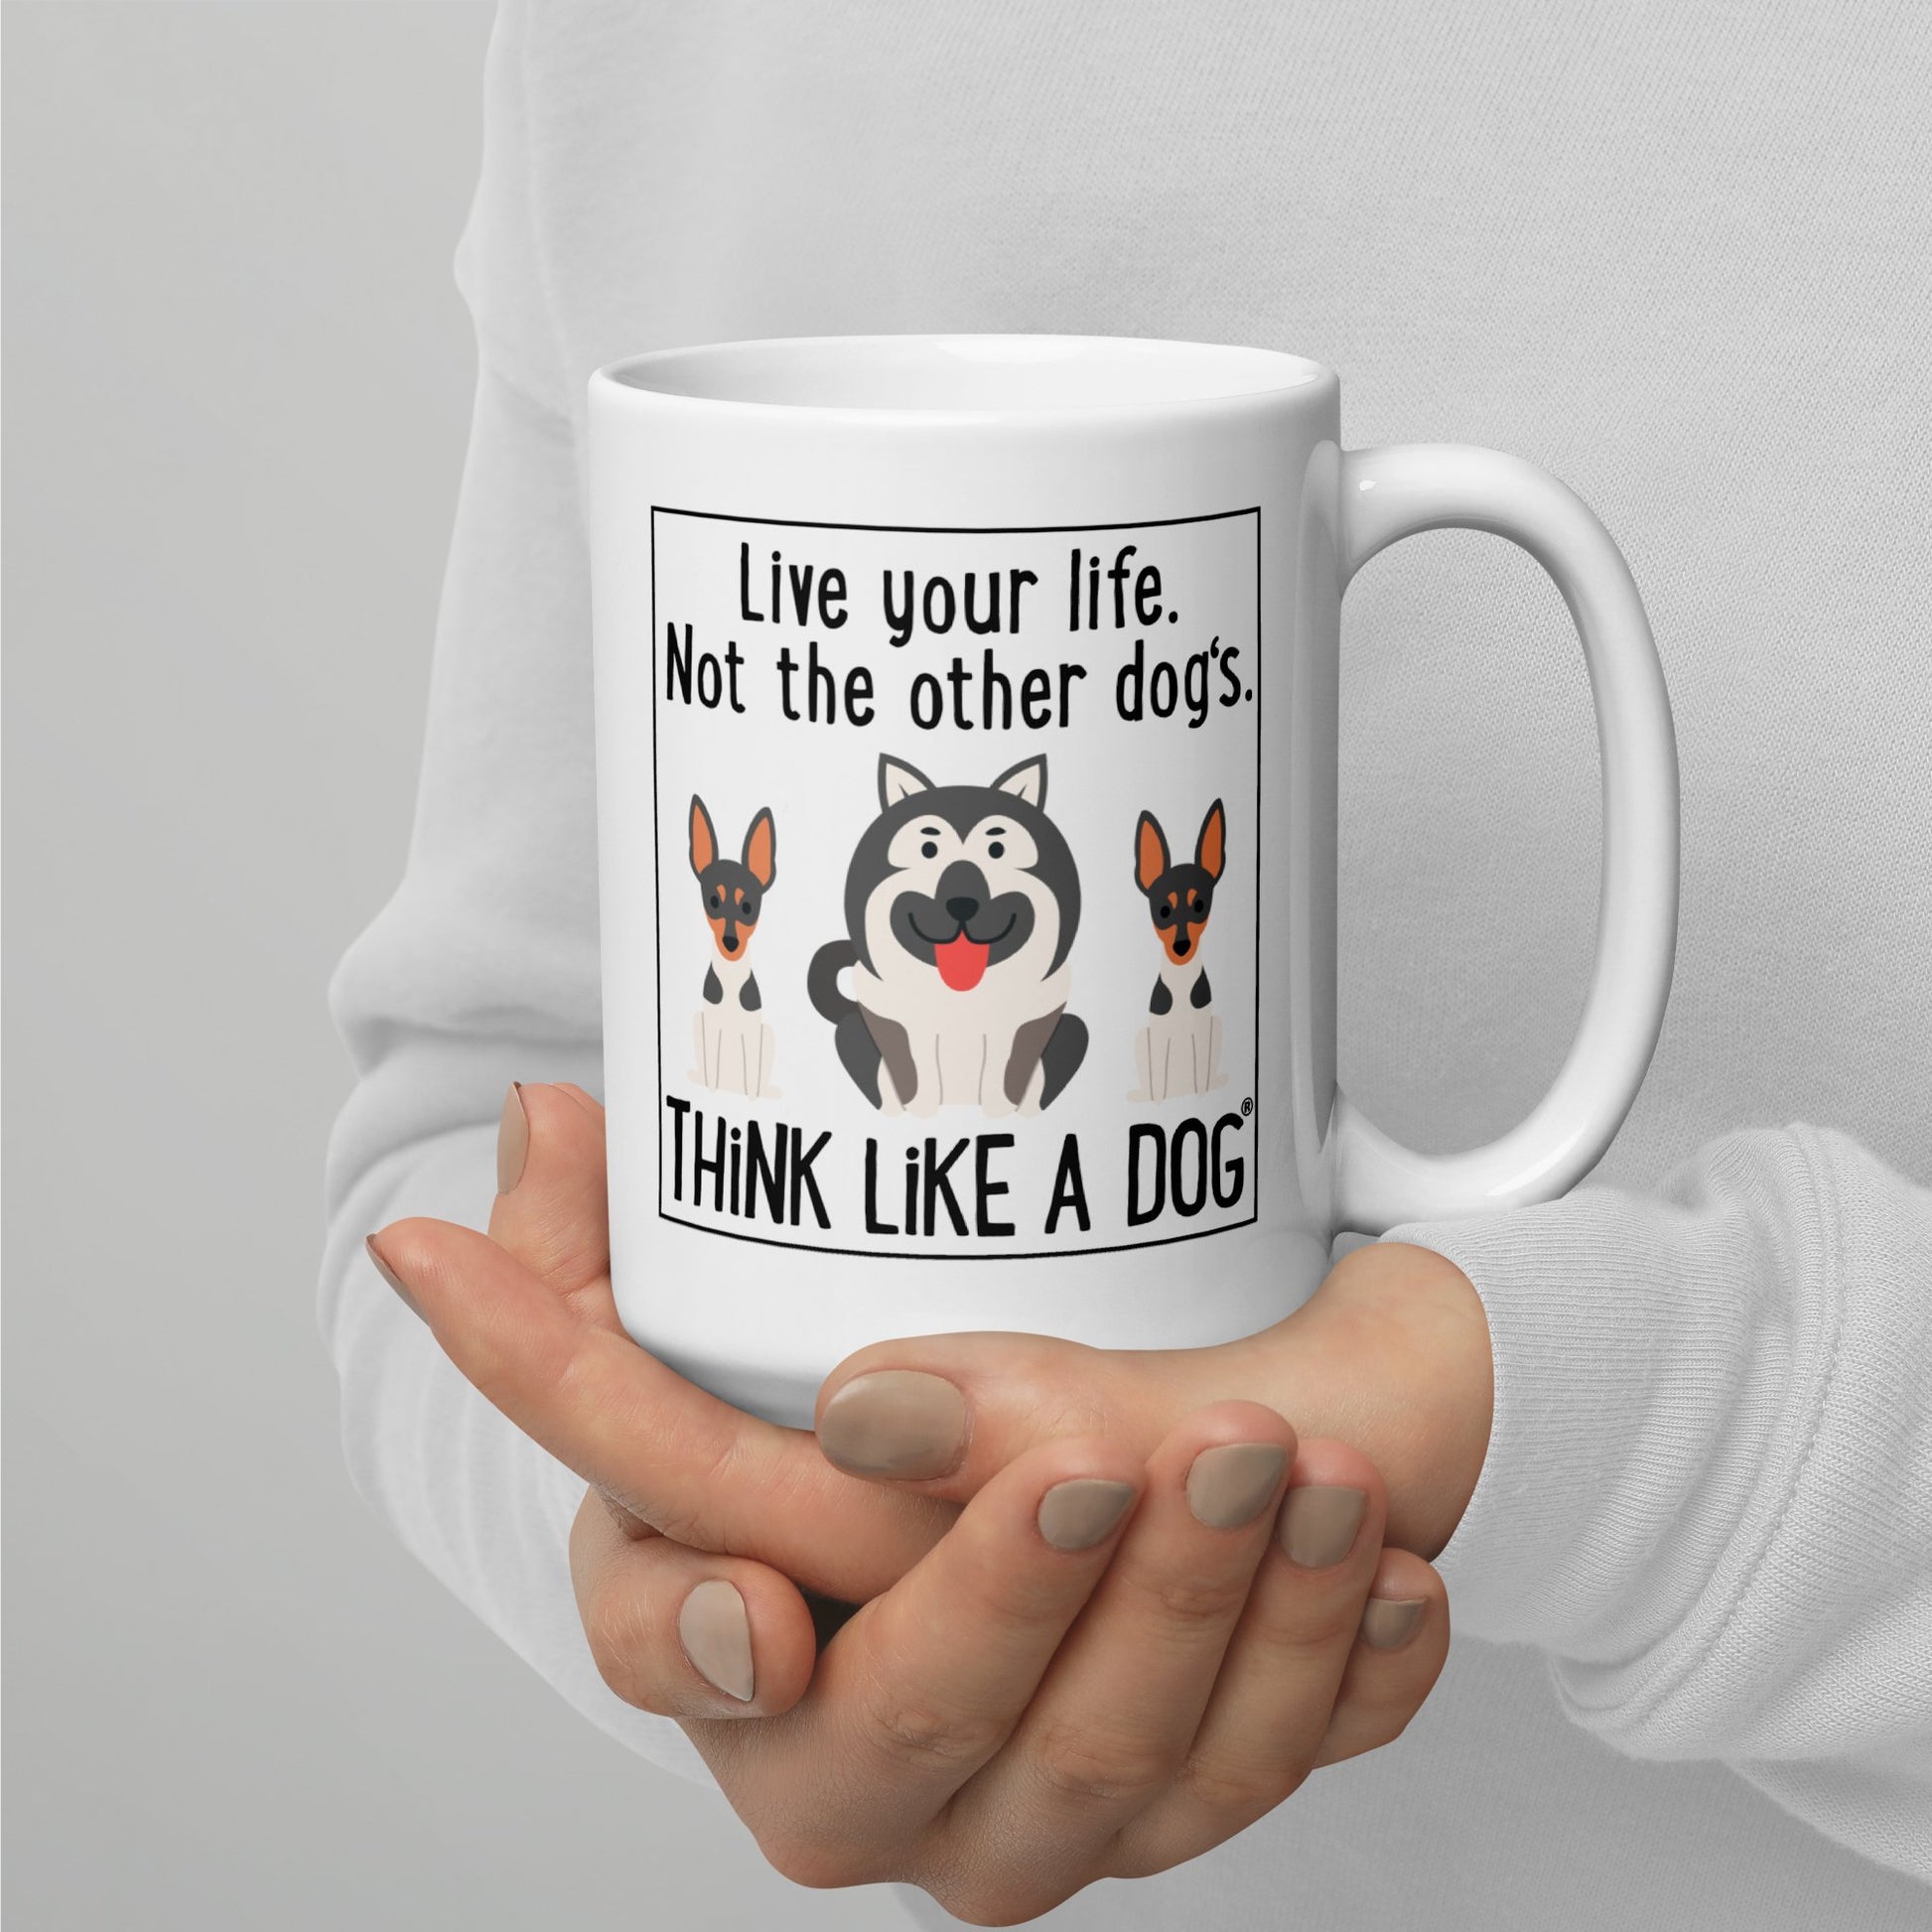 A person holding a THiNK LiKE A DOG® white glossy mug with text "live your life. not the other dog’s. think like a dog" and illustrations of three cartoon dogs.